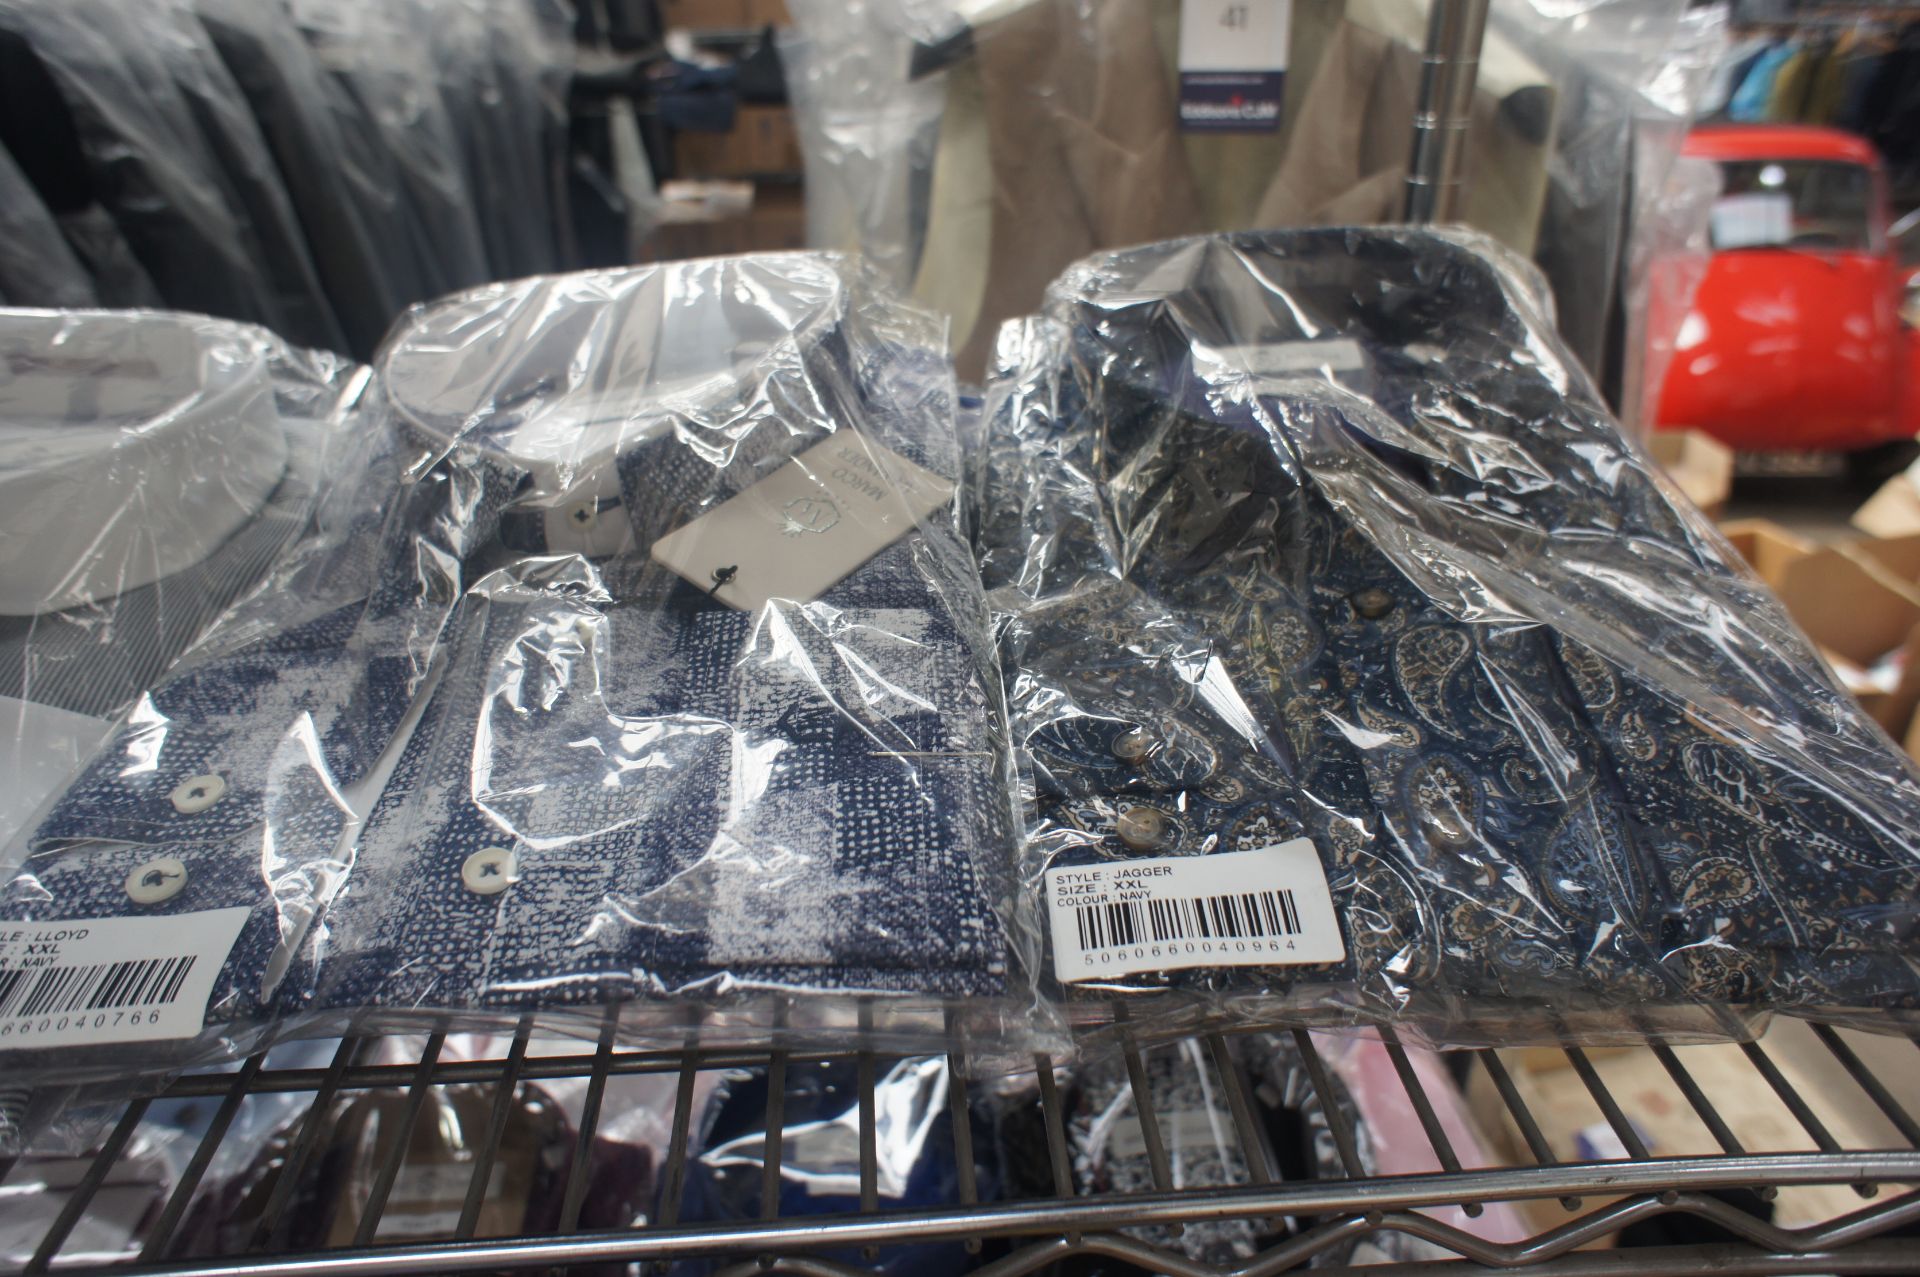 10 x Various packaged Marco Alexander slim fit designer shirts, XXL - Image 3 of 3